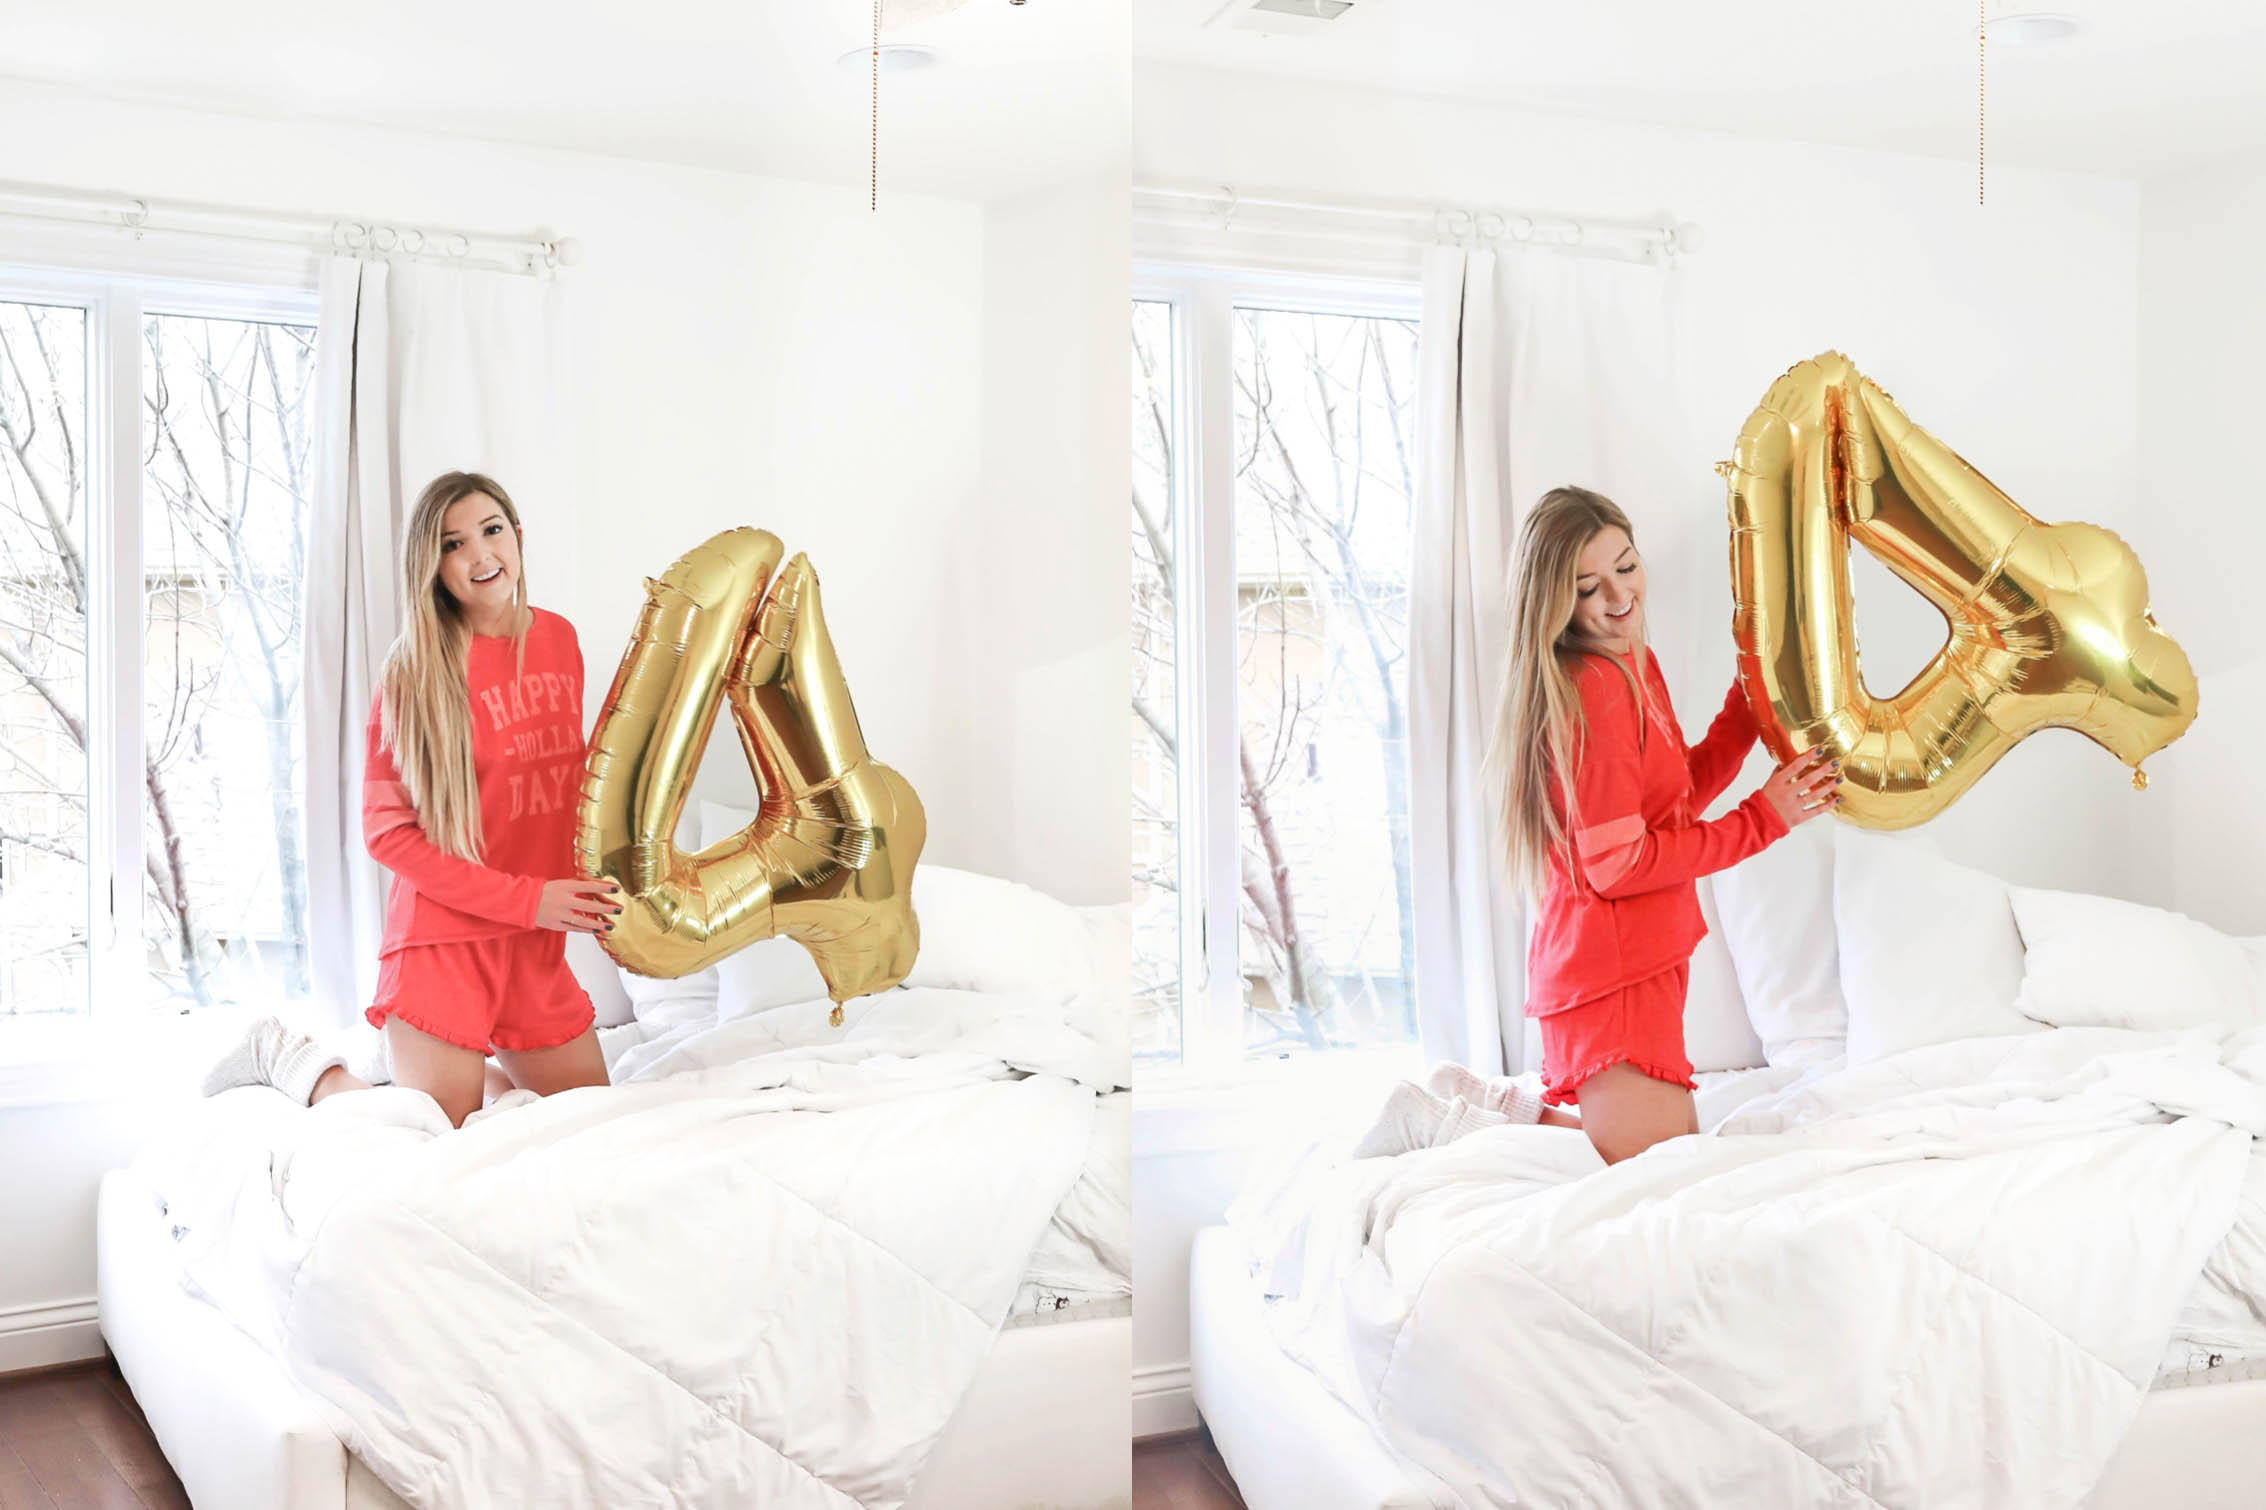 Blog anniverary photos! Cute photoshoot! Details on fashion blog daily dose of charm by lauren lindmark